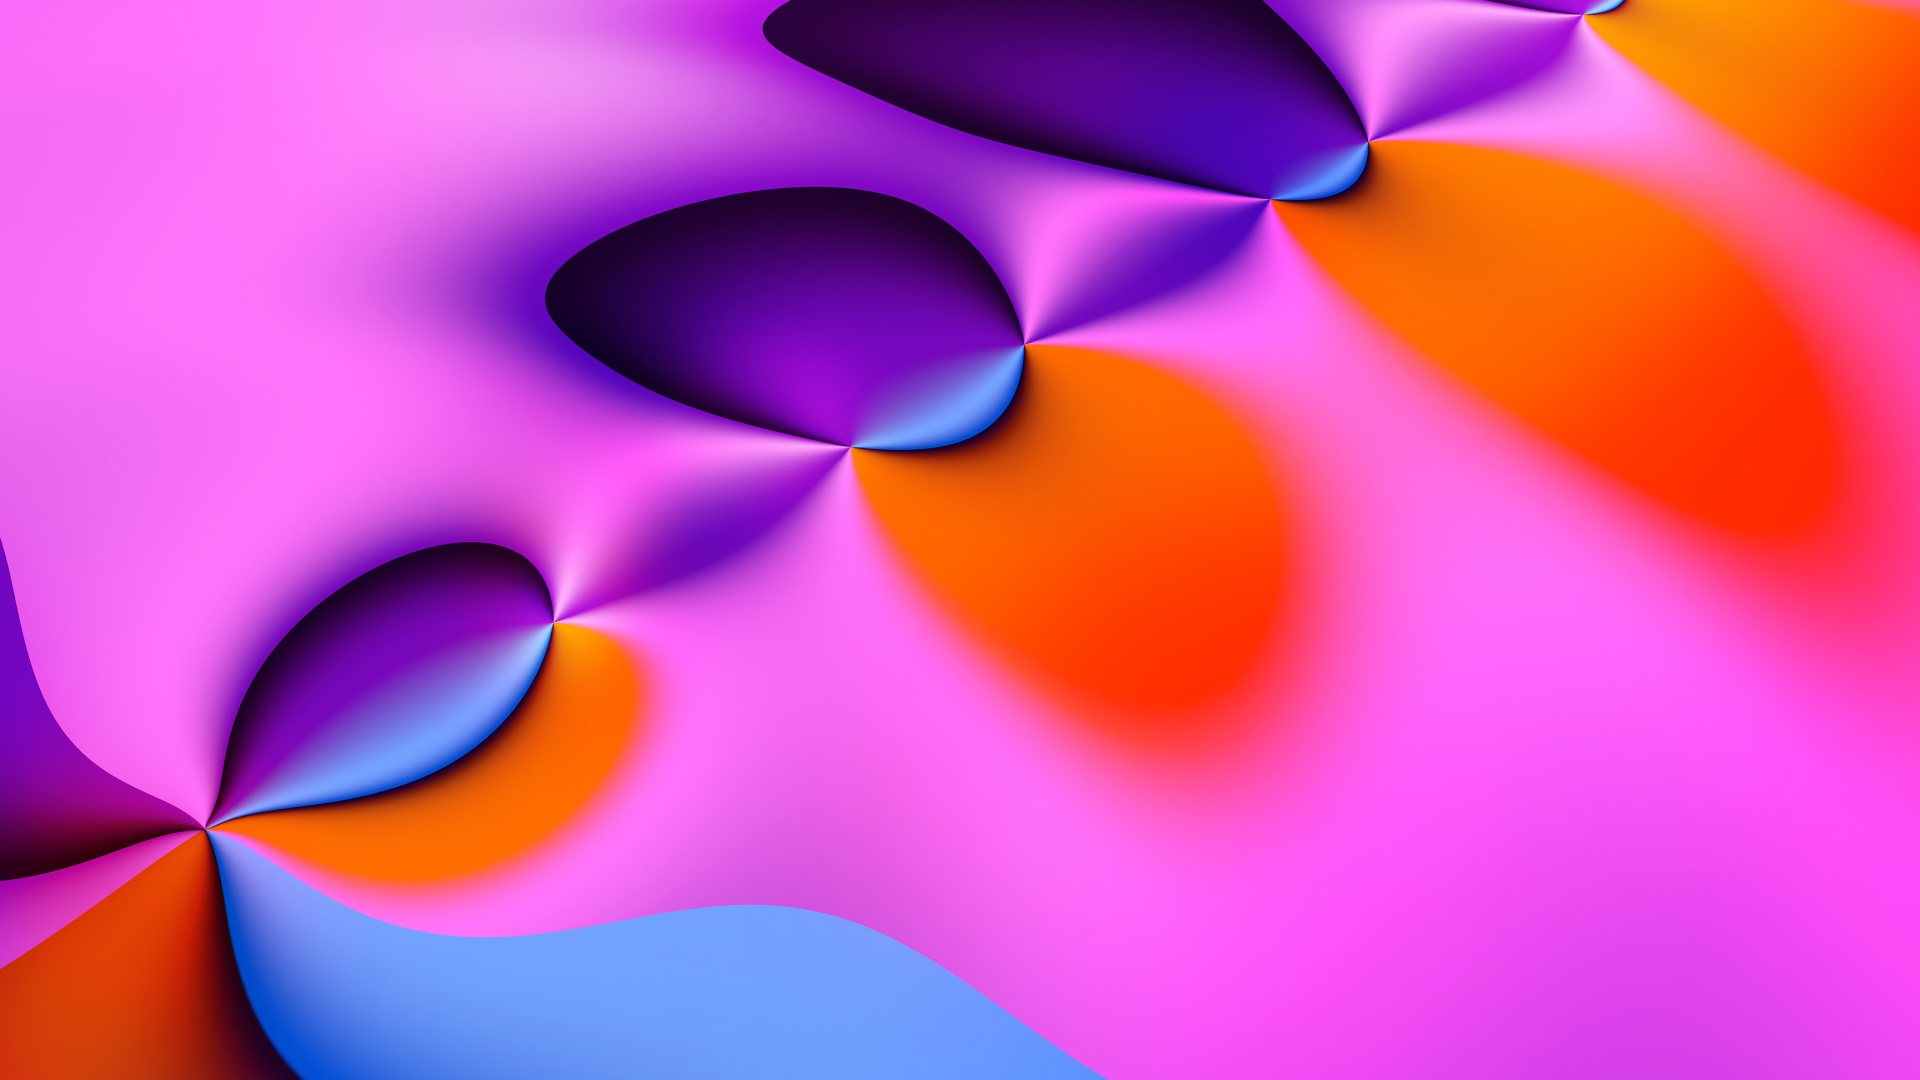 Purple Orange and Yellow Abstract Painting. Wallpaper in 1920x1080 Resolution